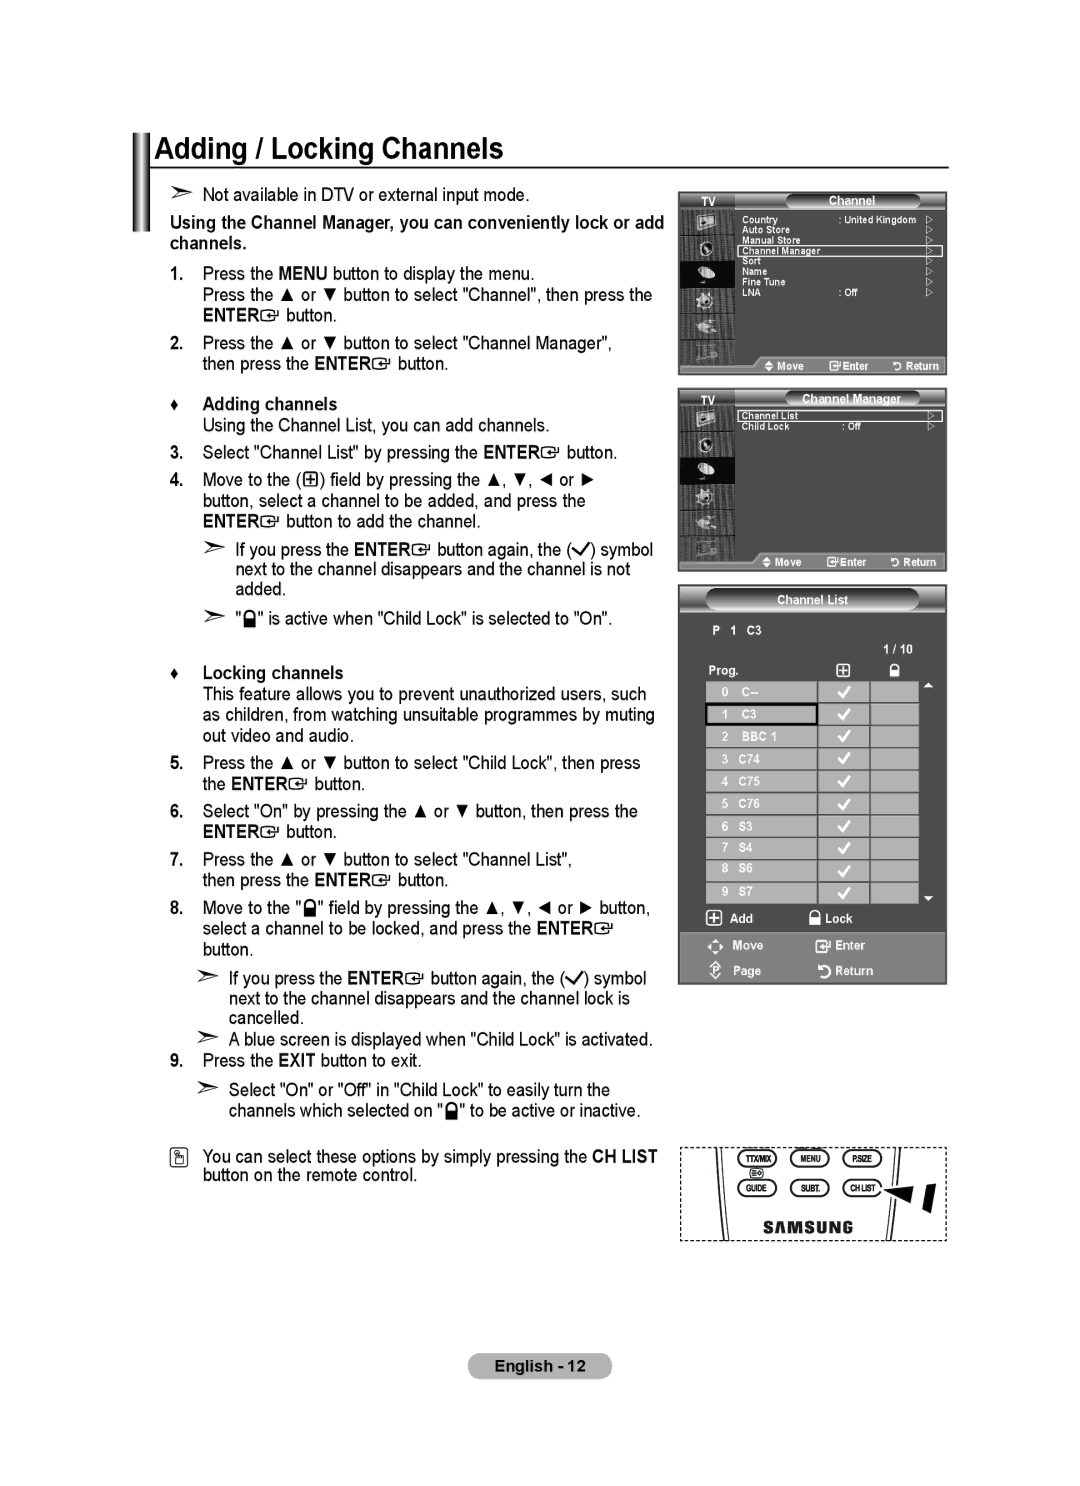 Samsung LE22A455C1D user manual Adding / Locking Channels, Not available in DTV or external input mode, Adding channels 